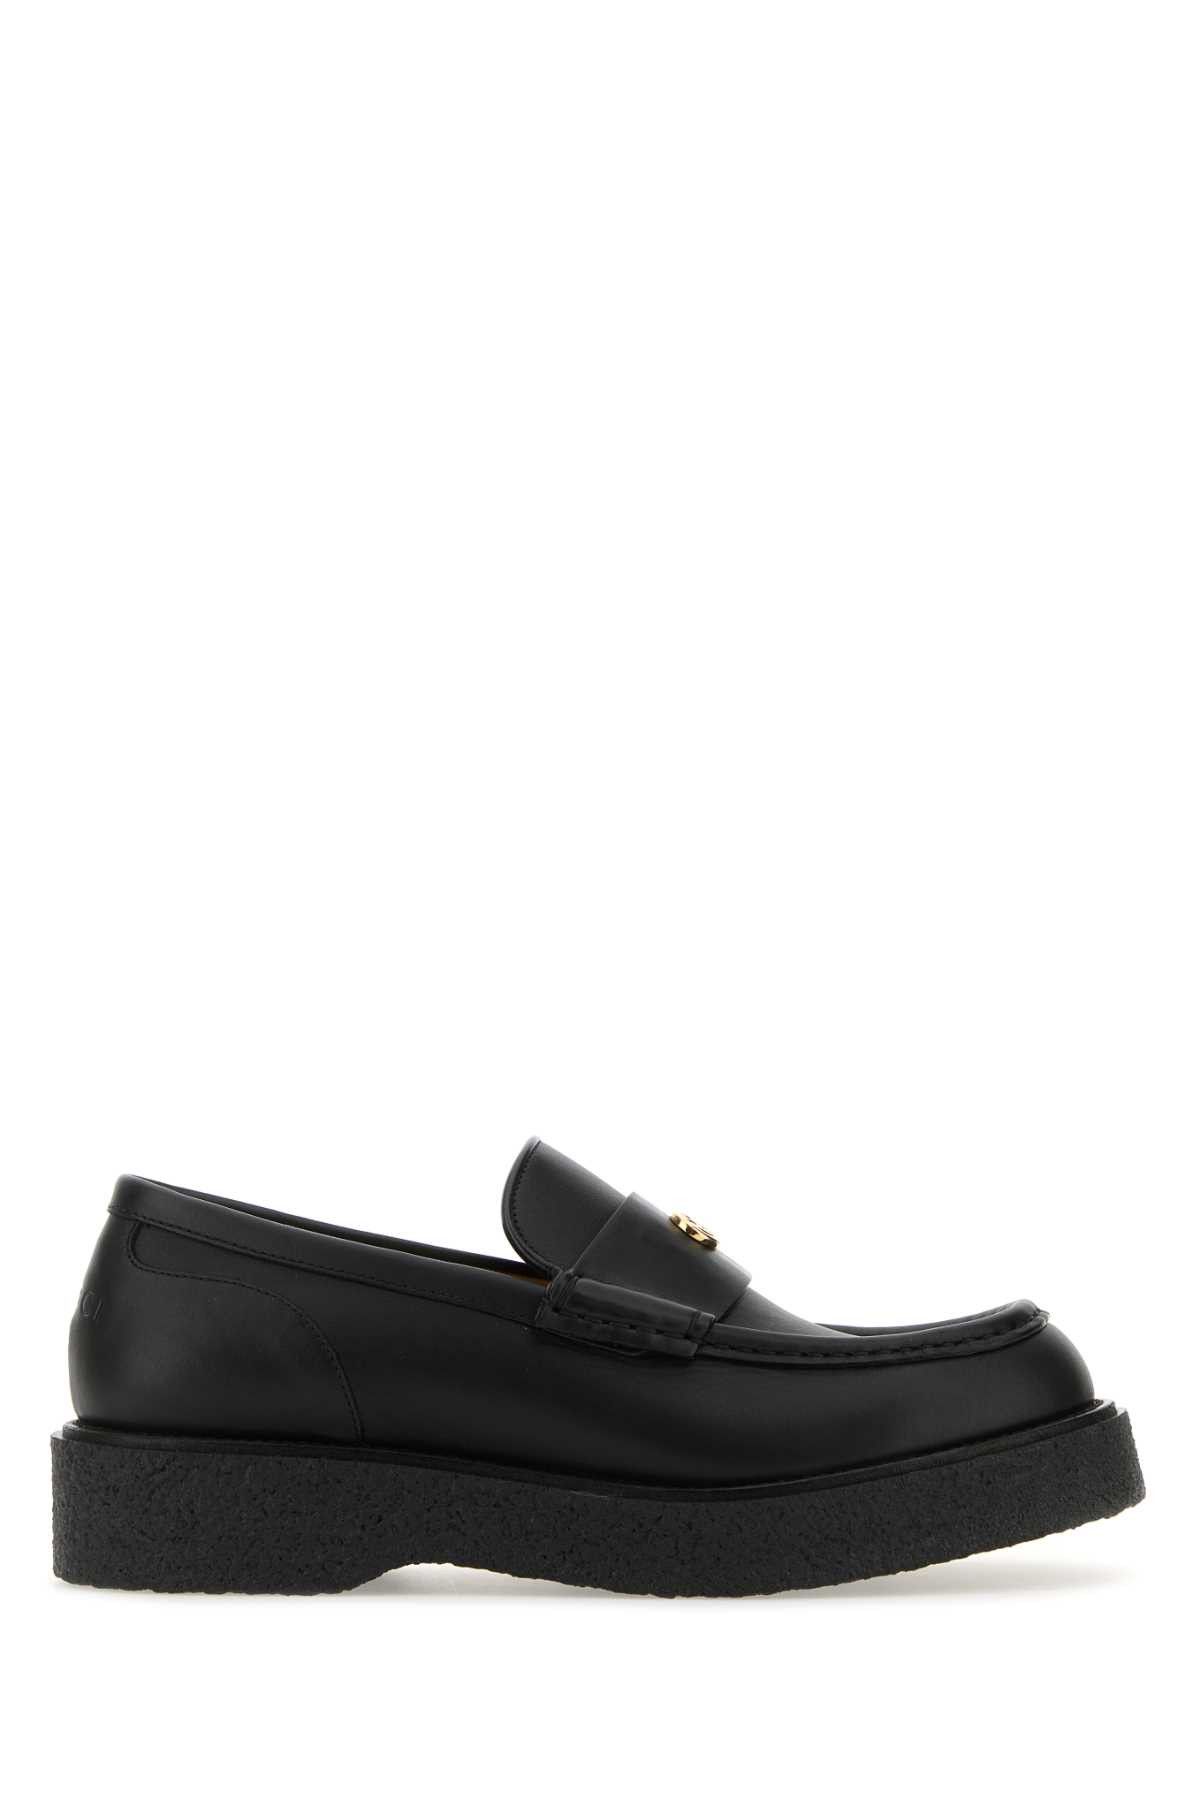 Gucci Black Leather Loafers | Grailed